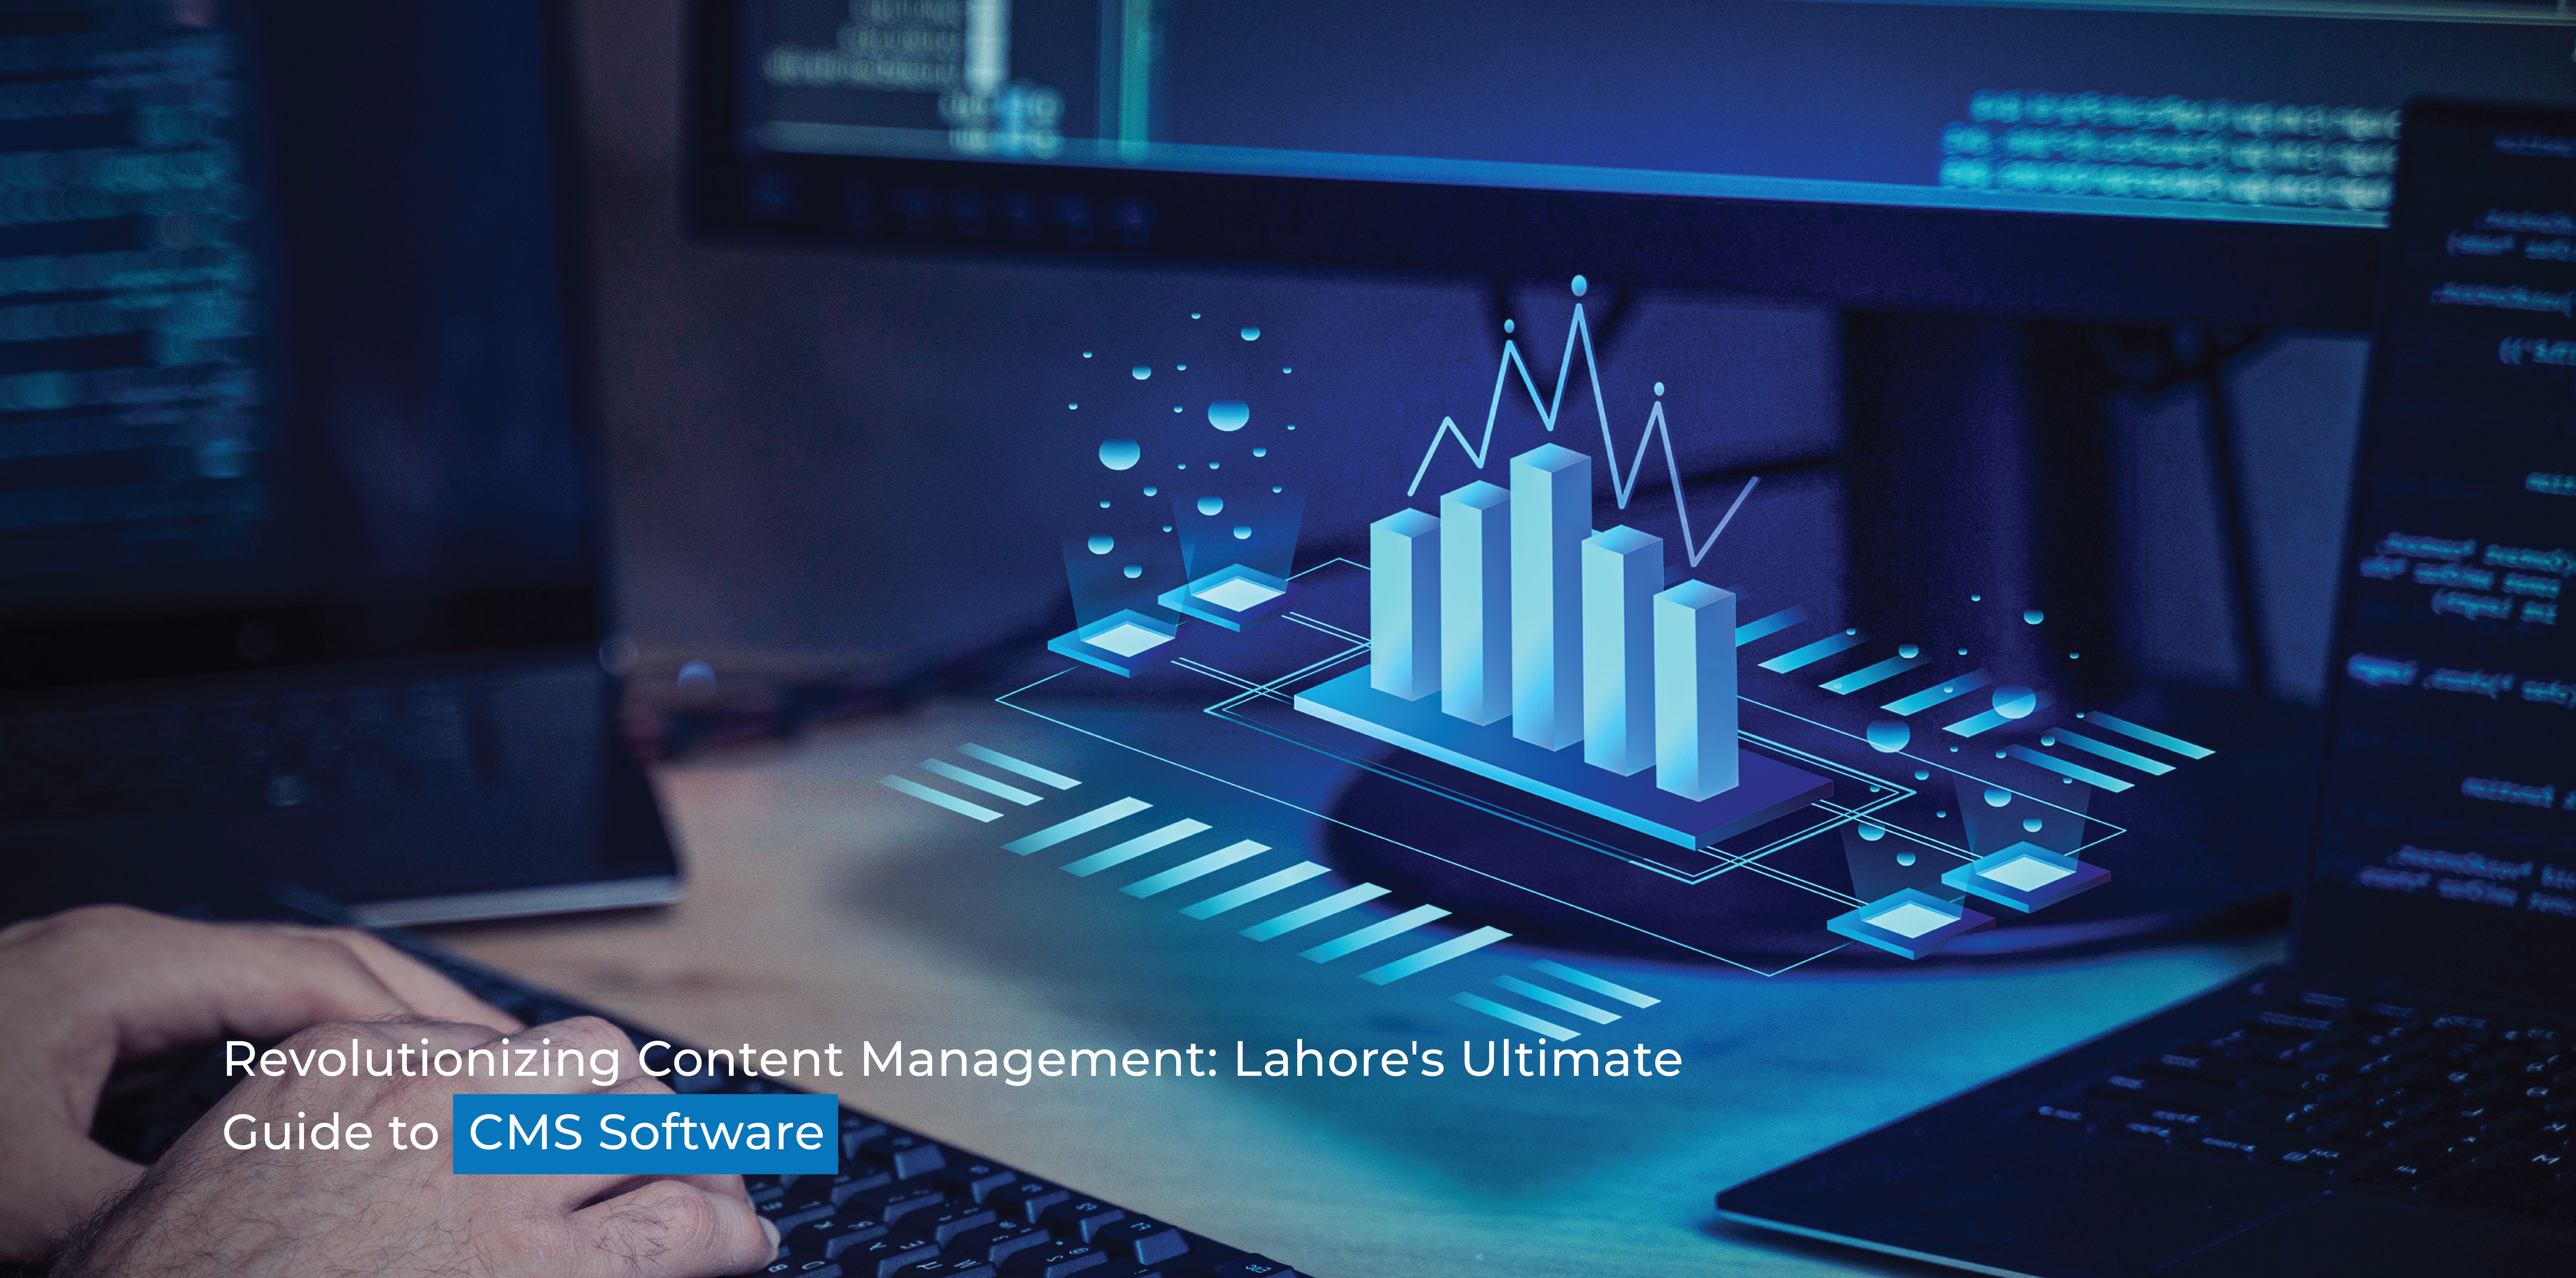 Revolutionizing Content Management: Lahore's Ultimate Guide to CMS Software